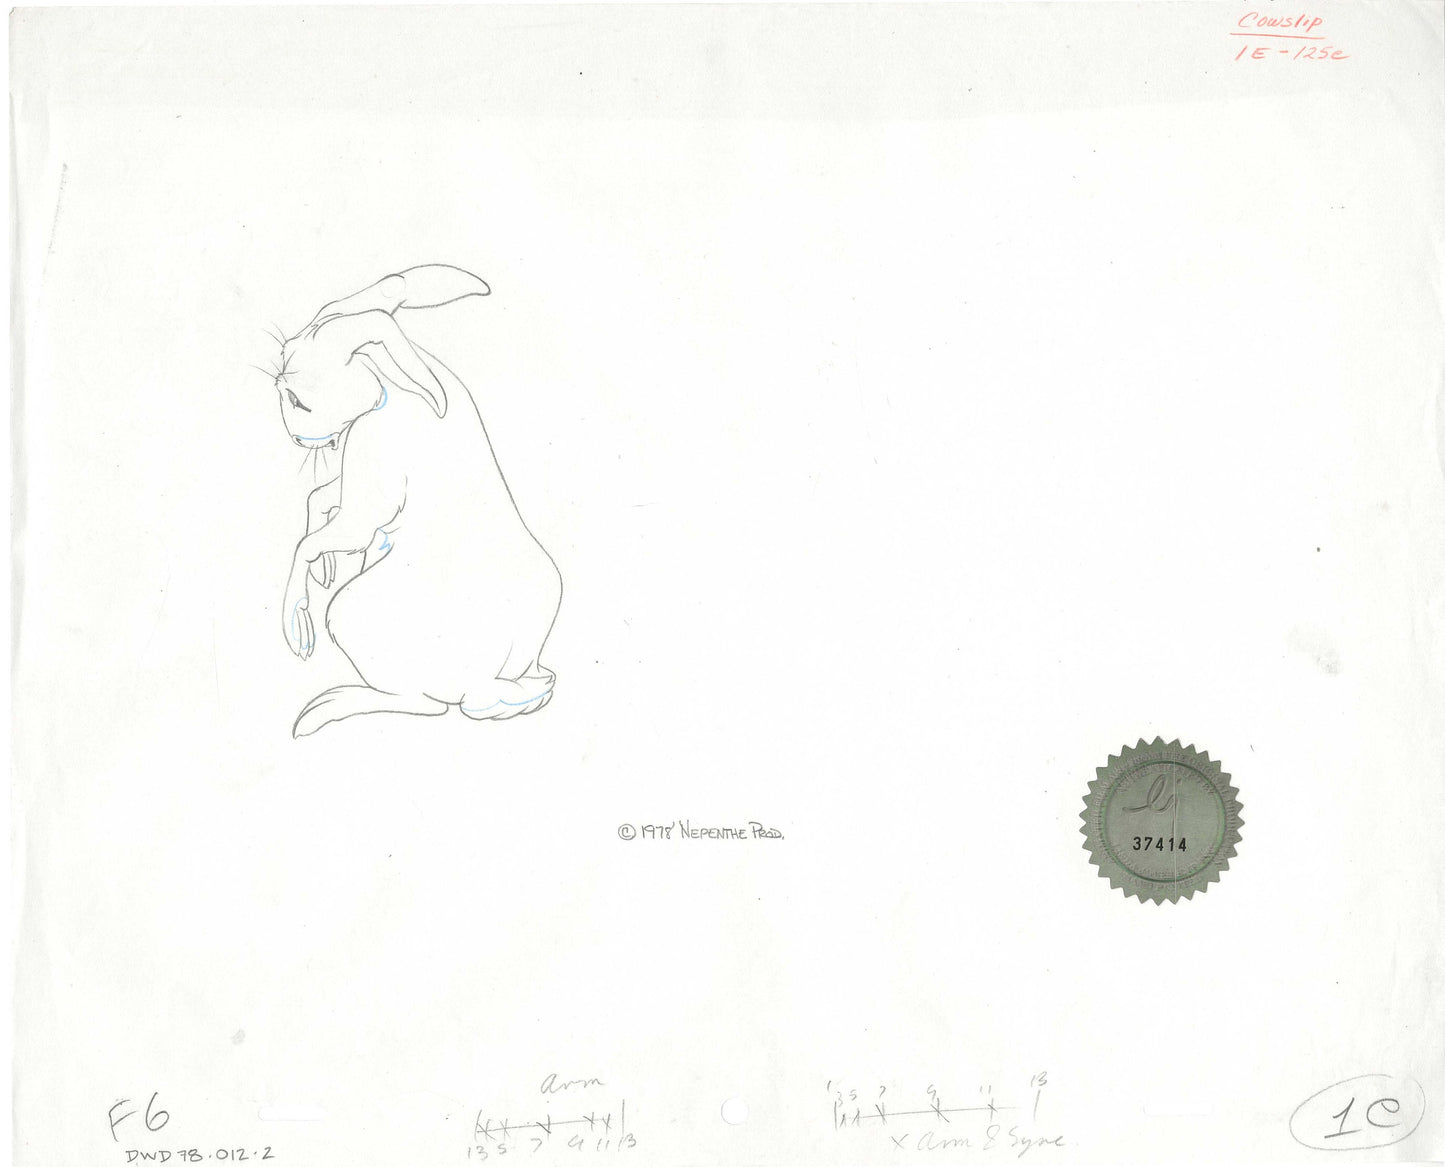 Watership Down 1978 Production Animation Cel Drawing of Cowslip with Linda Jones Enterprise Seal and Certificate of Authenticity 012-002